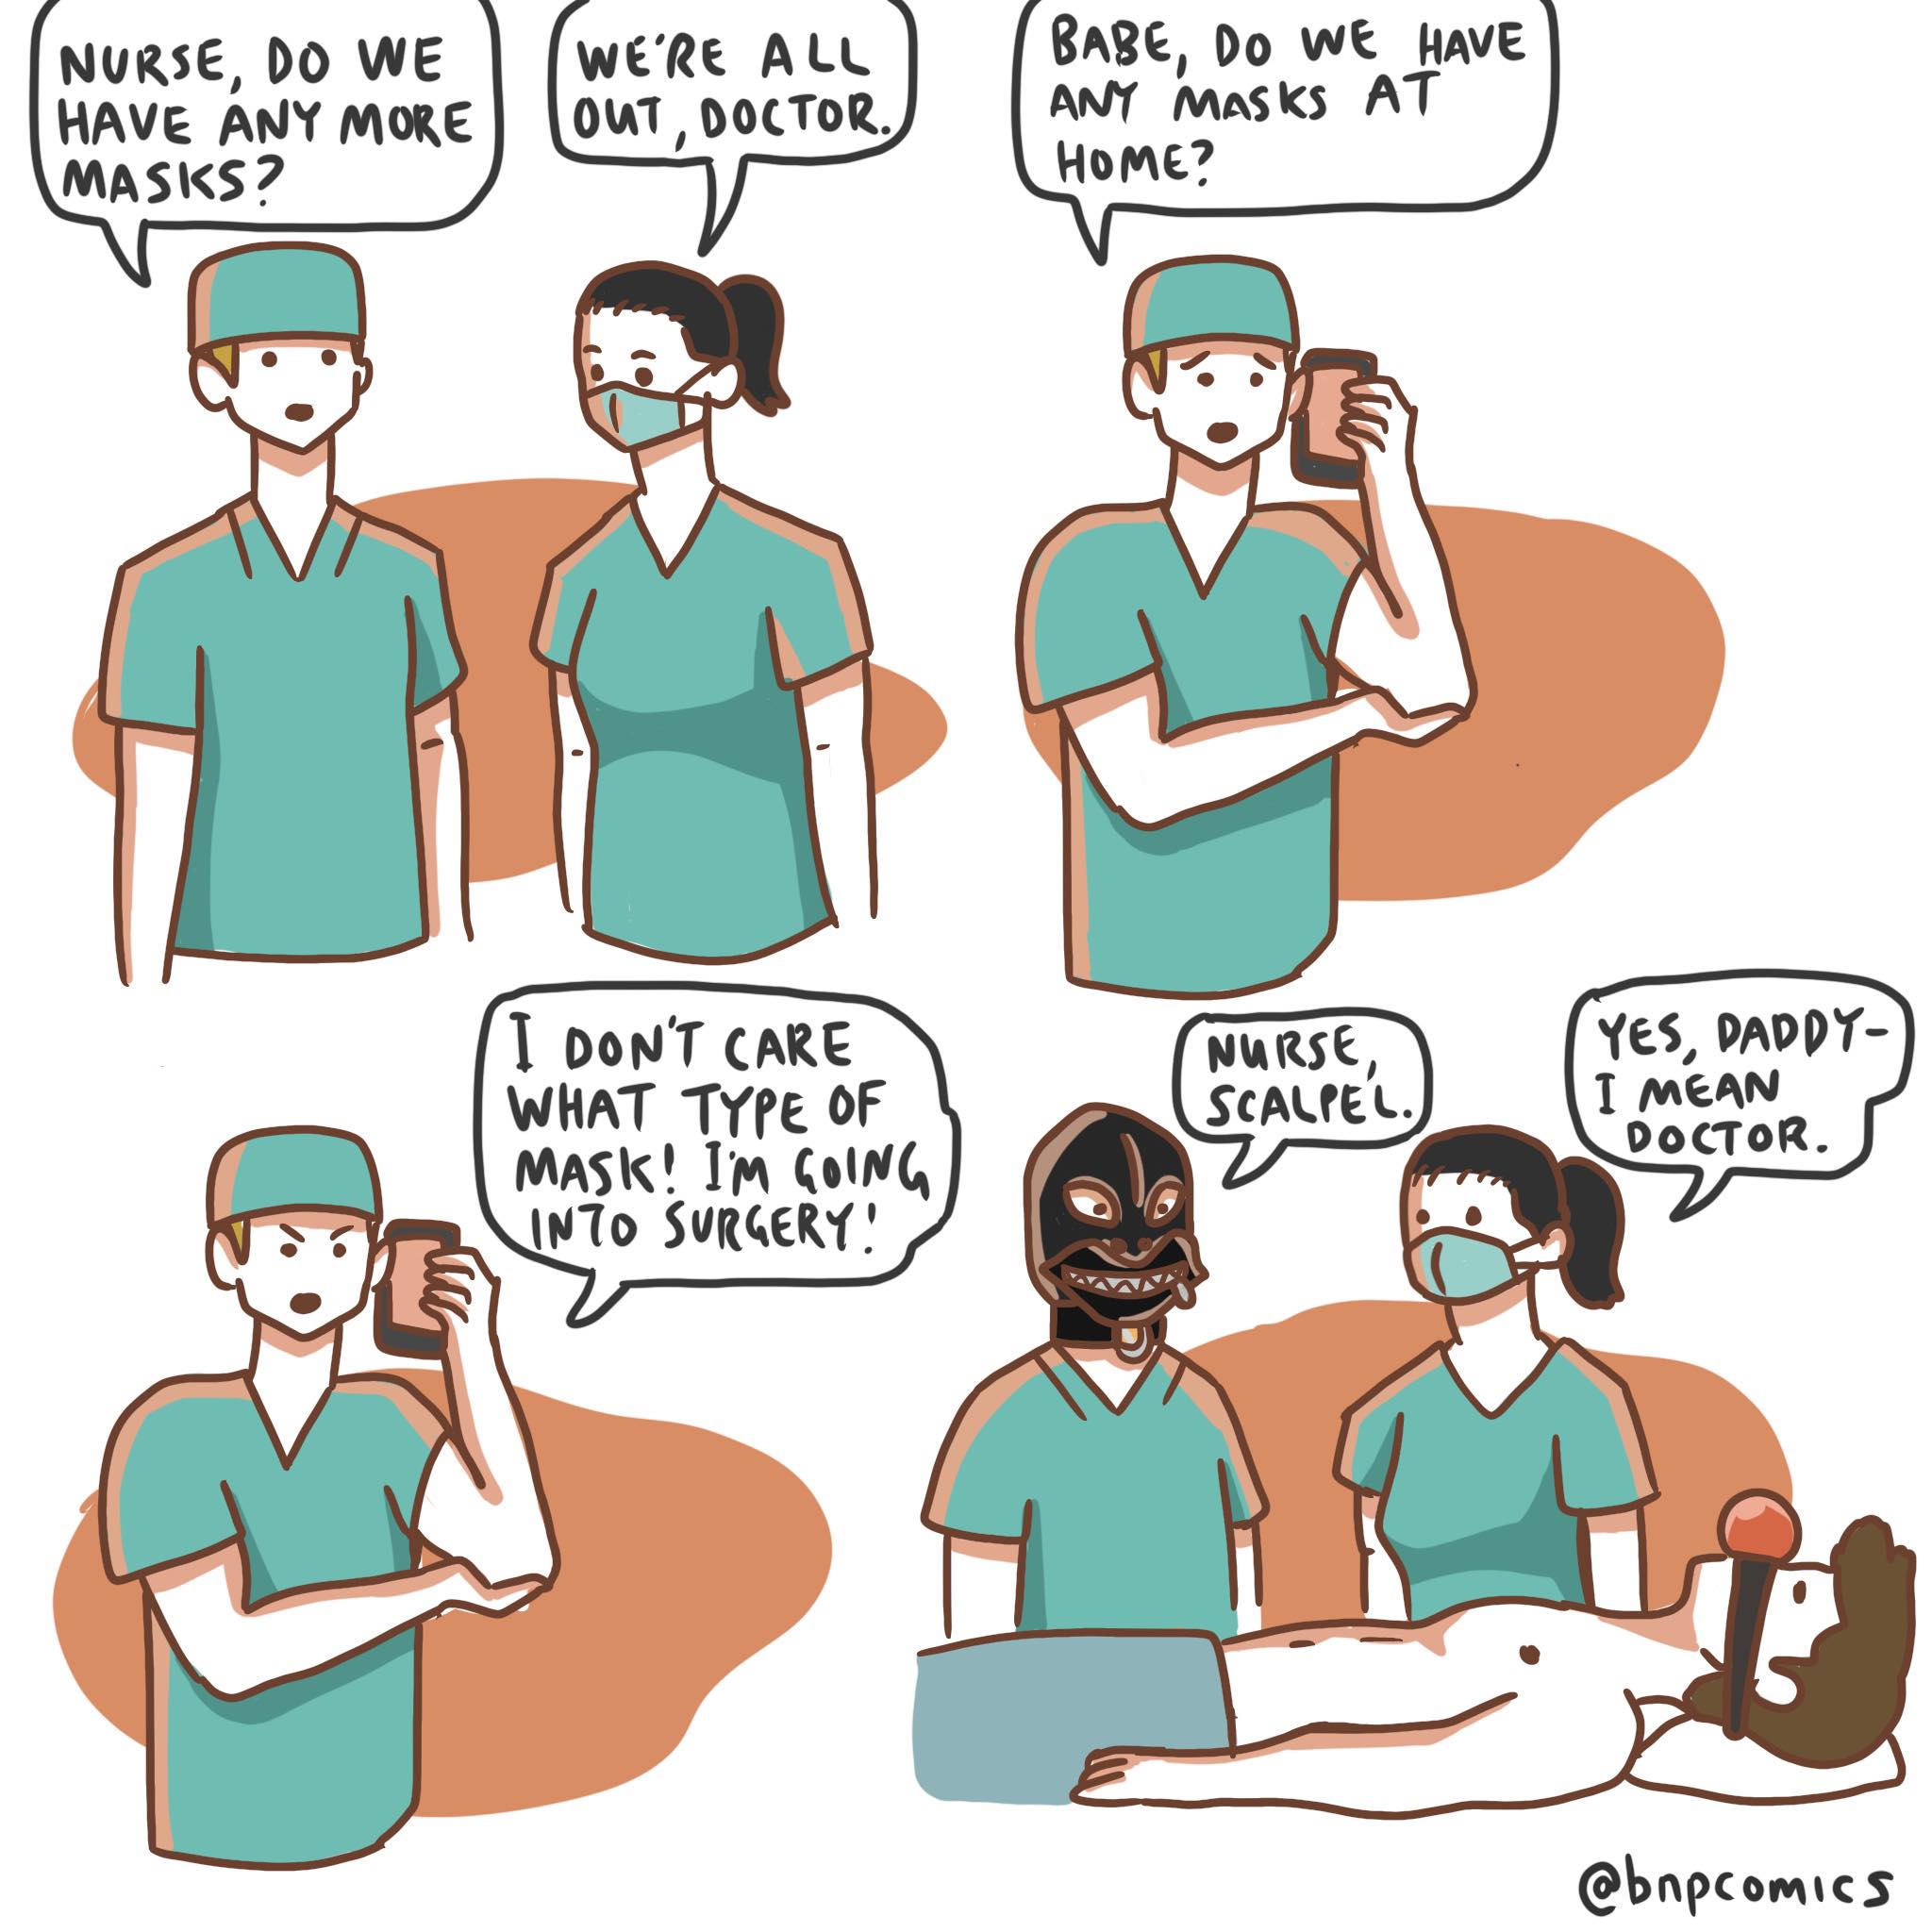  mask shortage(from bnpcomics), Daddy Comics  mask shortage(from bnpcomics), Daddy text: NURSE, DO WE HAVE AtJY MORE MASKS? WE'RE , DOCTOR. I DON'T CARE WHAT TYPE of MAsk! 1m SURGERY.' 8mge, Do we RAVE AT Home Nia«se, ScAl..tE Yes, PAPPY- I m€AN DoCToR. @bnpcom1CS 